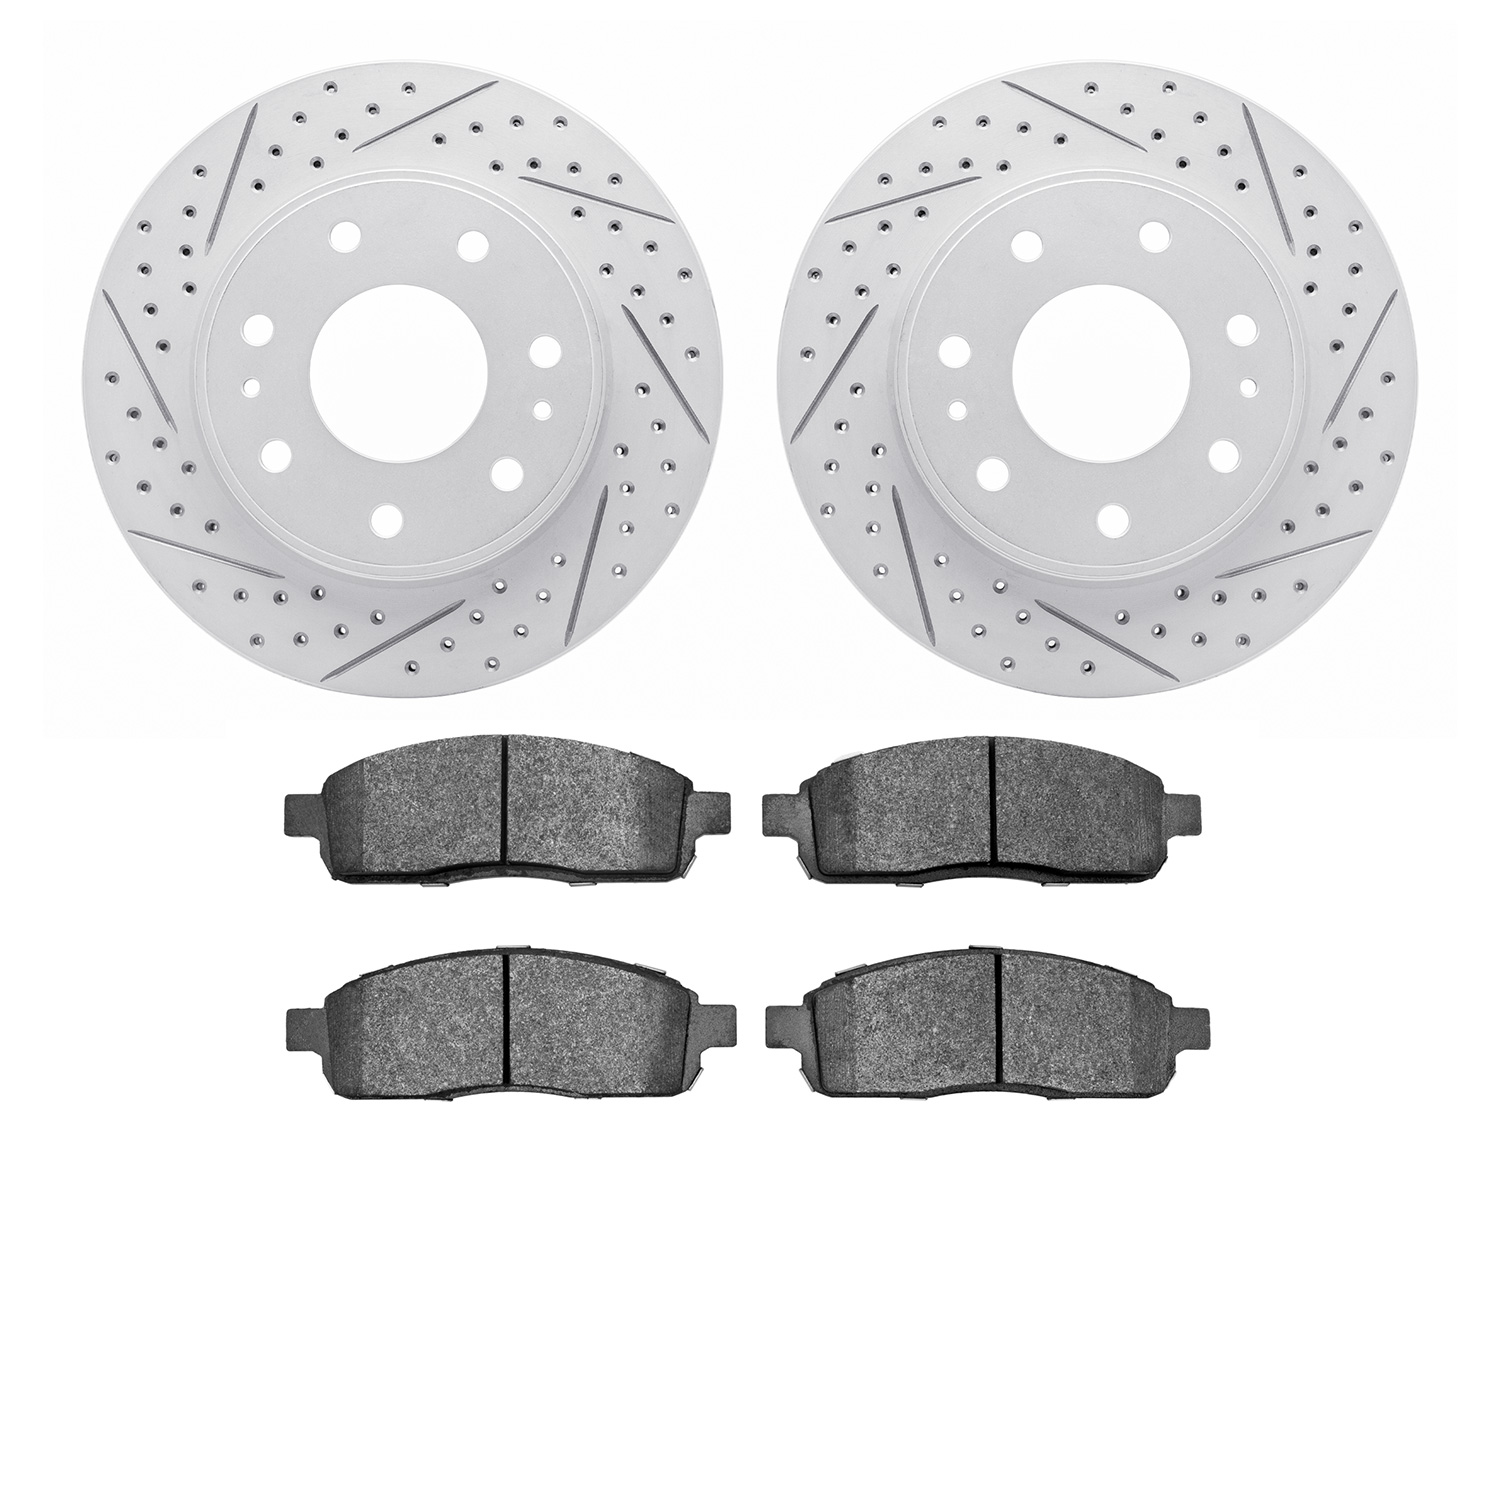 2502-54207 Geoperformance Drilled/Slotted Rotors w/5000 Advanced Brake Pads Kit, 2009-2009 Ford/Lincoln/Mercury/Mazda, Position: